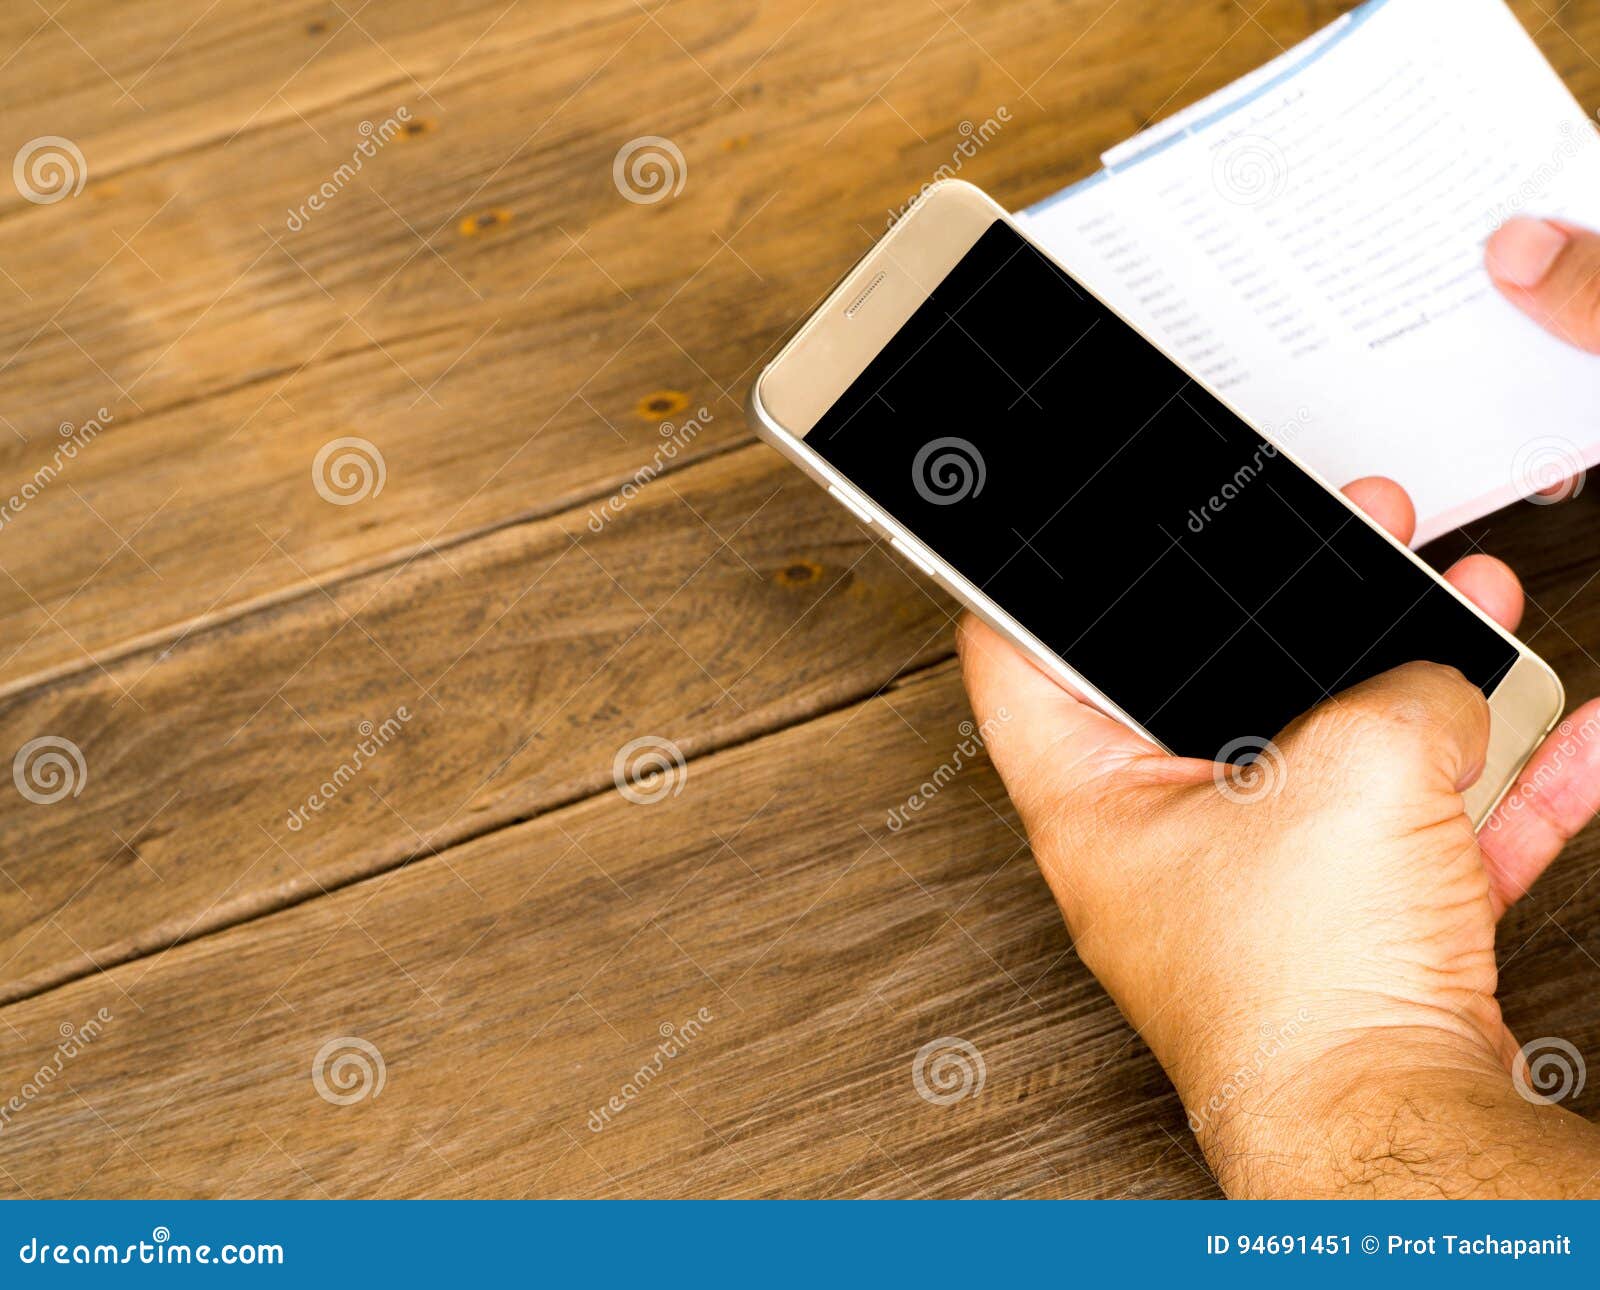 A Man Holding Smart Phone For Using Online Banking App For Paying Credit Card Bill Stock Image ...